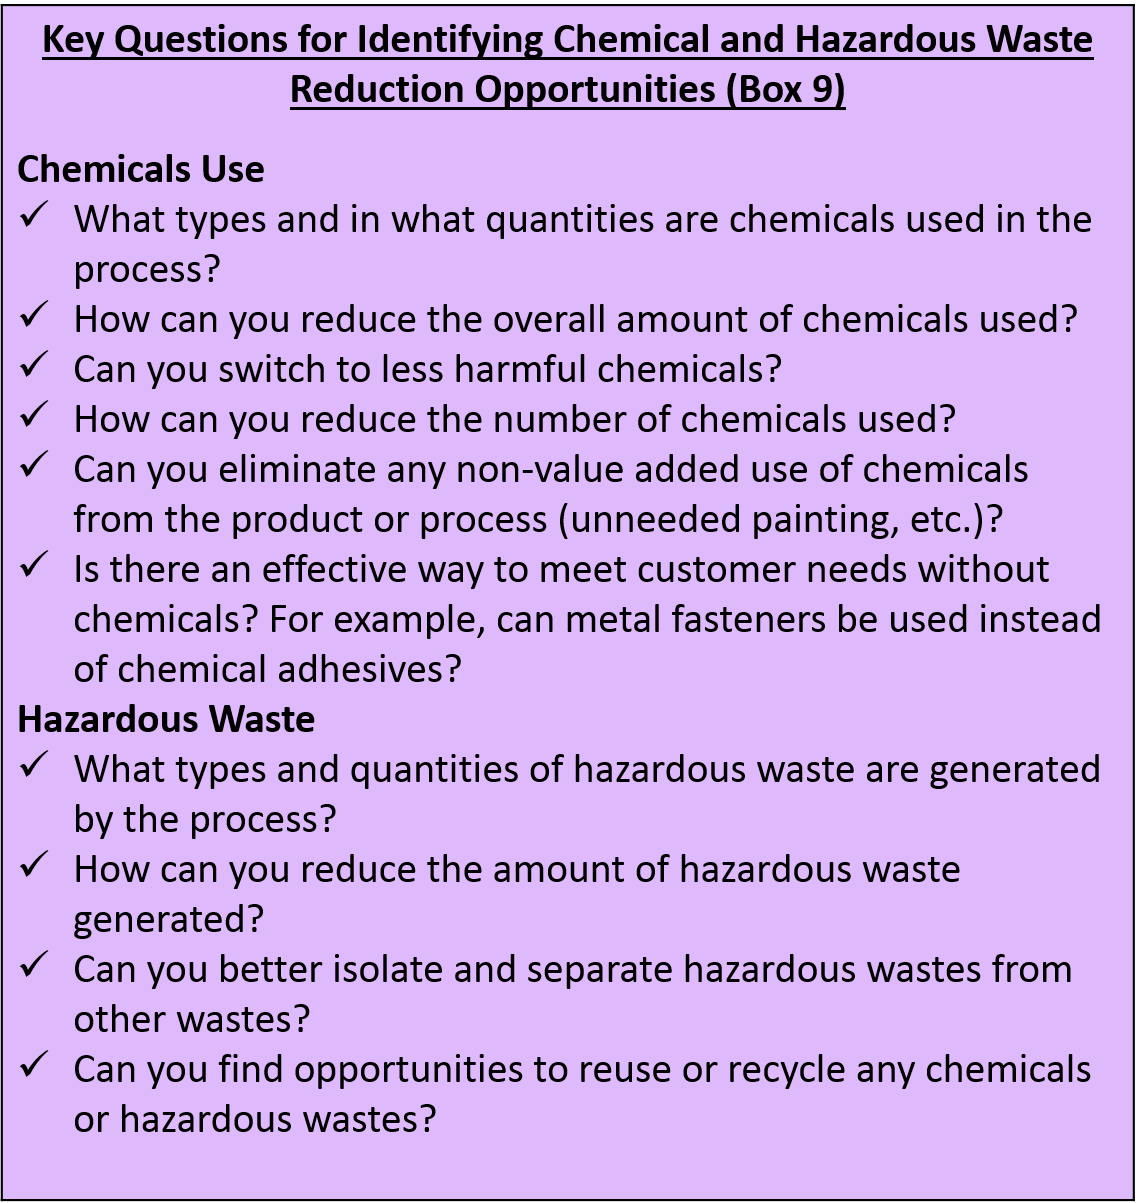 Key Questions for Identifying Chemical and Hazardous Waste Reduction Opportunities (Box 9)